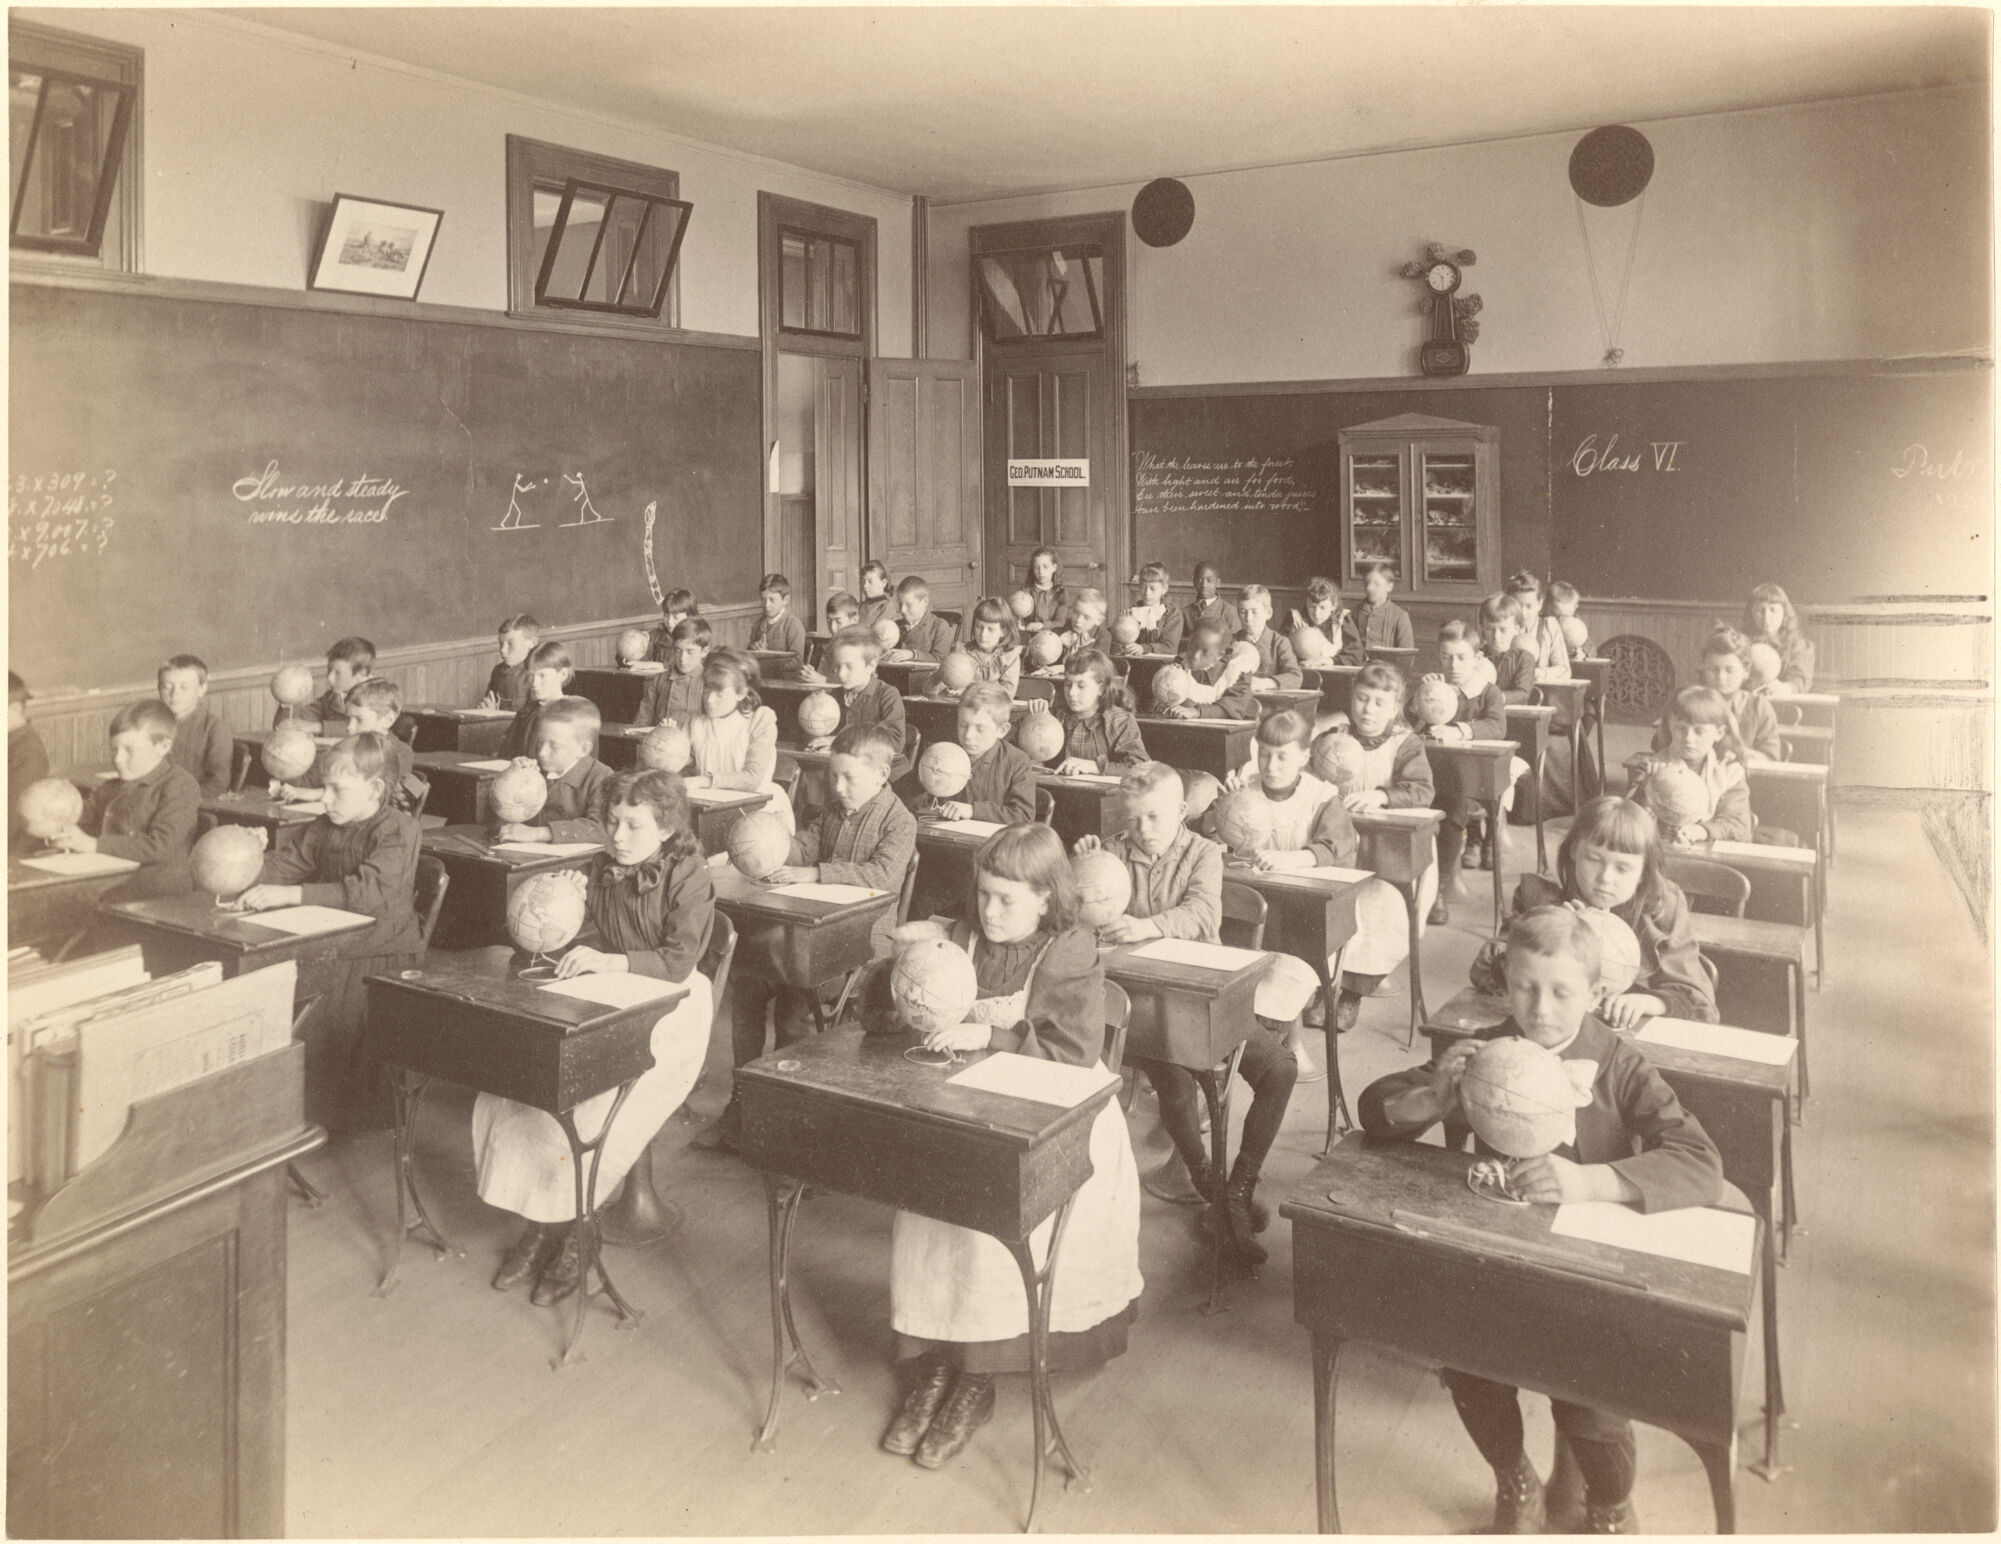 Though Boston schools were integrated, the Black population of the city at the time was around 5%, compared with today’s approximately 20%. As a result, there were proportionally few Black students in classrooms. Students in Boston’s Putnam School, ca. 1890-1900.